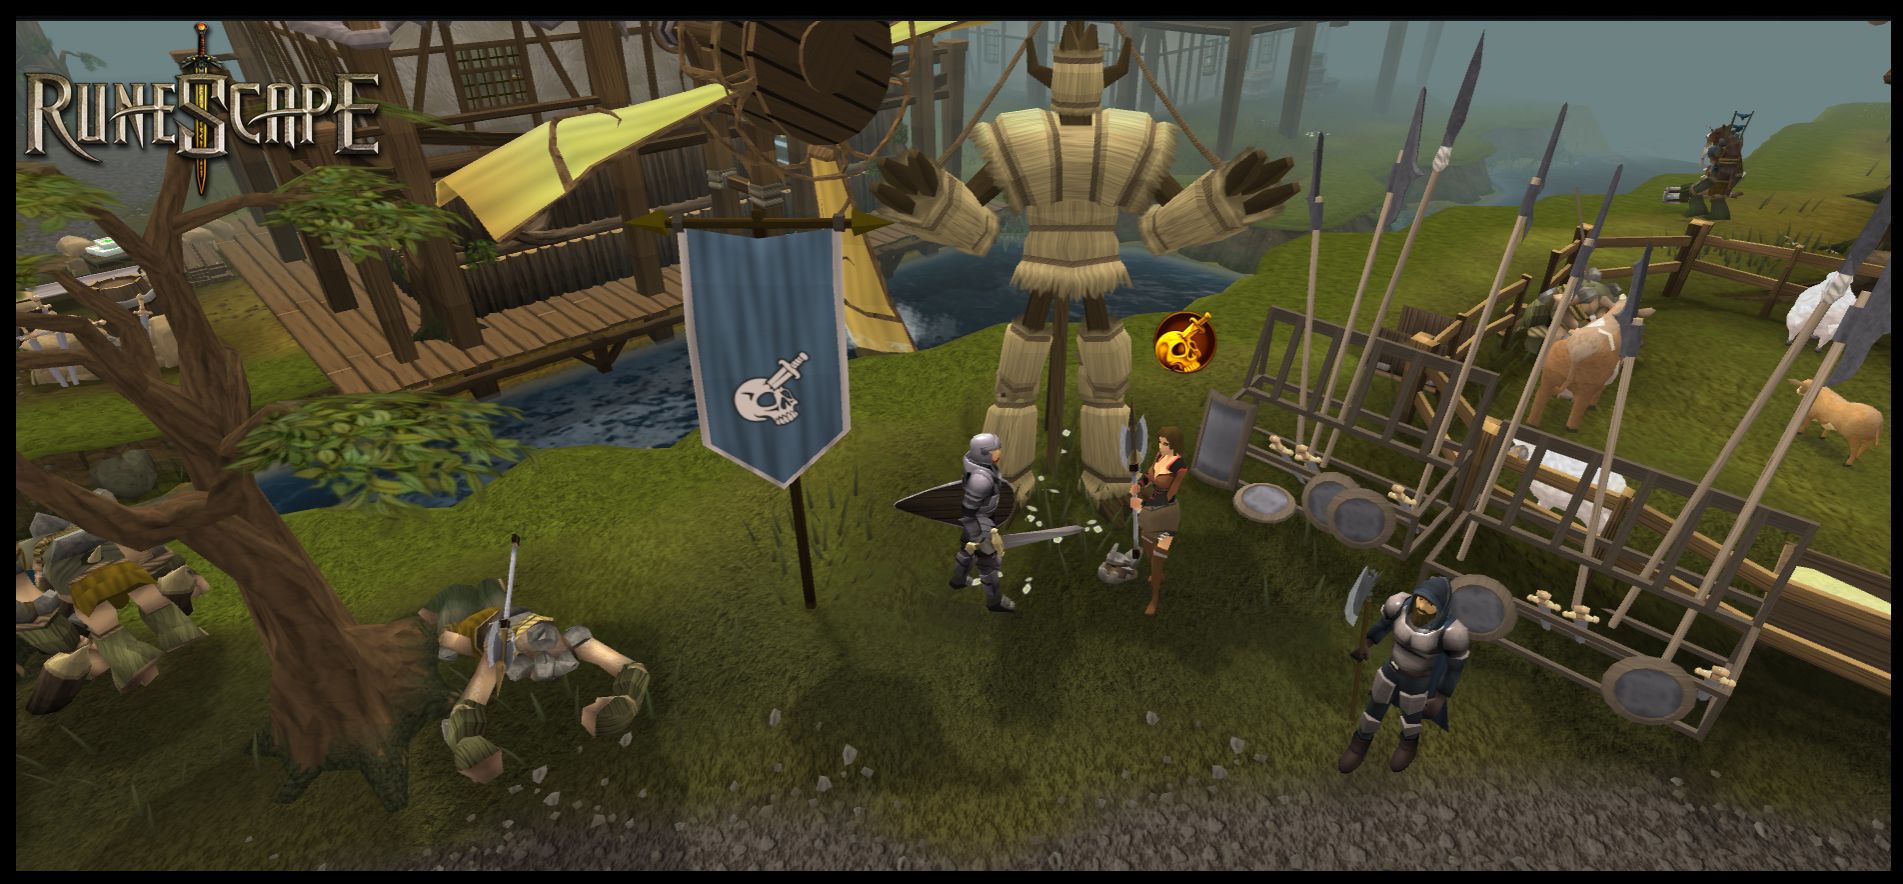 Runescape for Mobile on iPhone XS [What You Need to Know] - Alvaro Trigo's  Blog